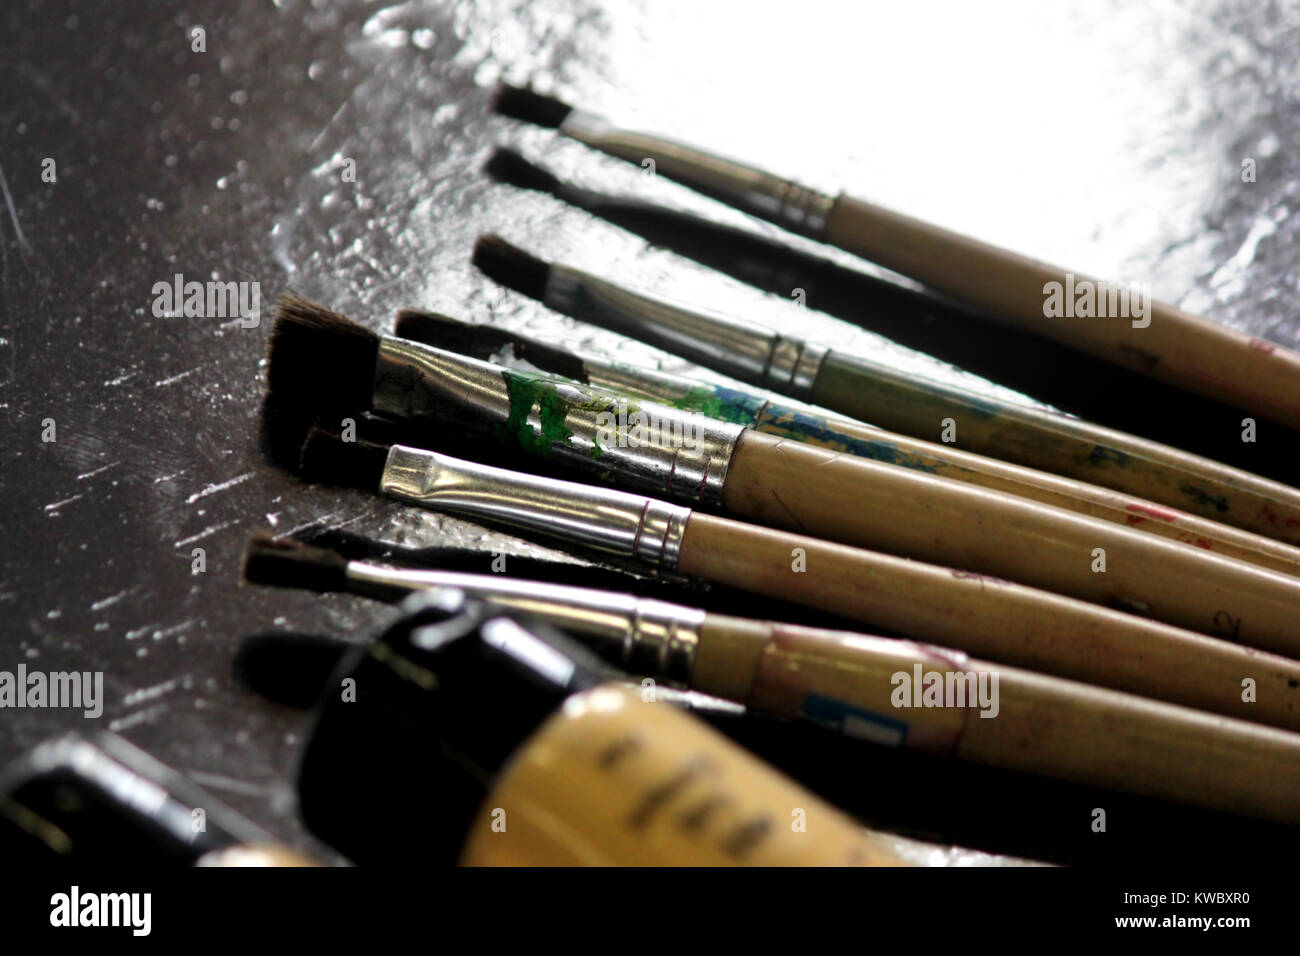 art materials, artists paint brushes on wooden table Stock Photo